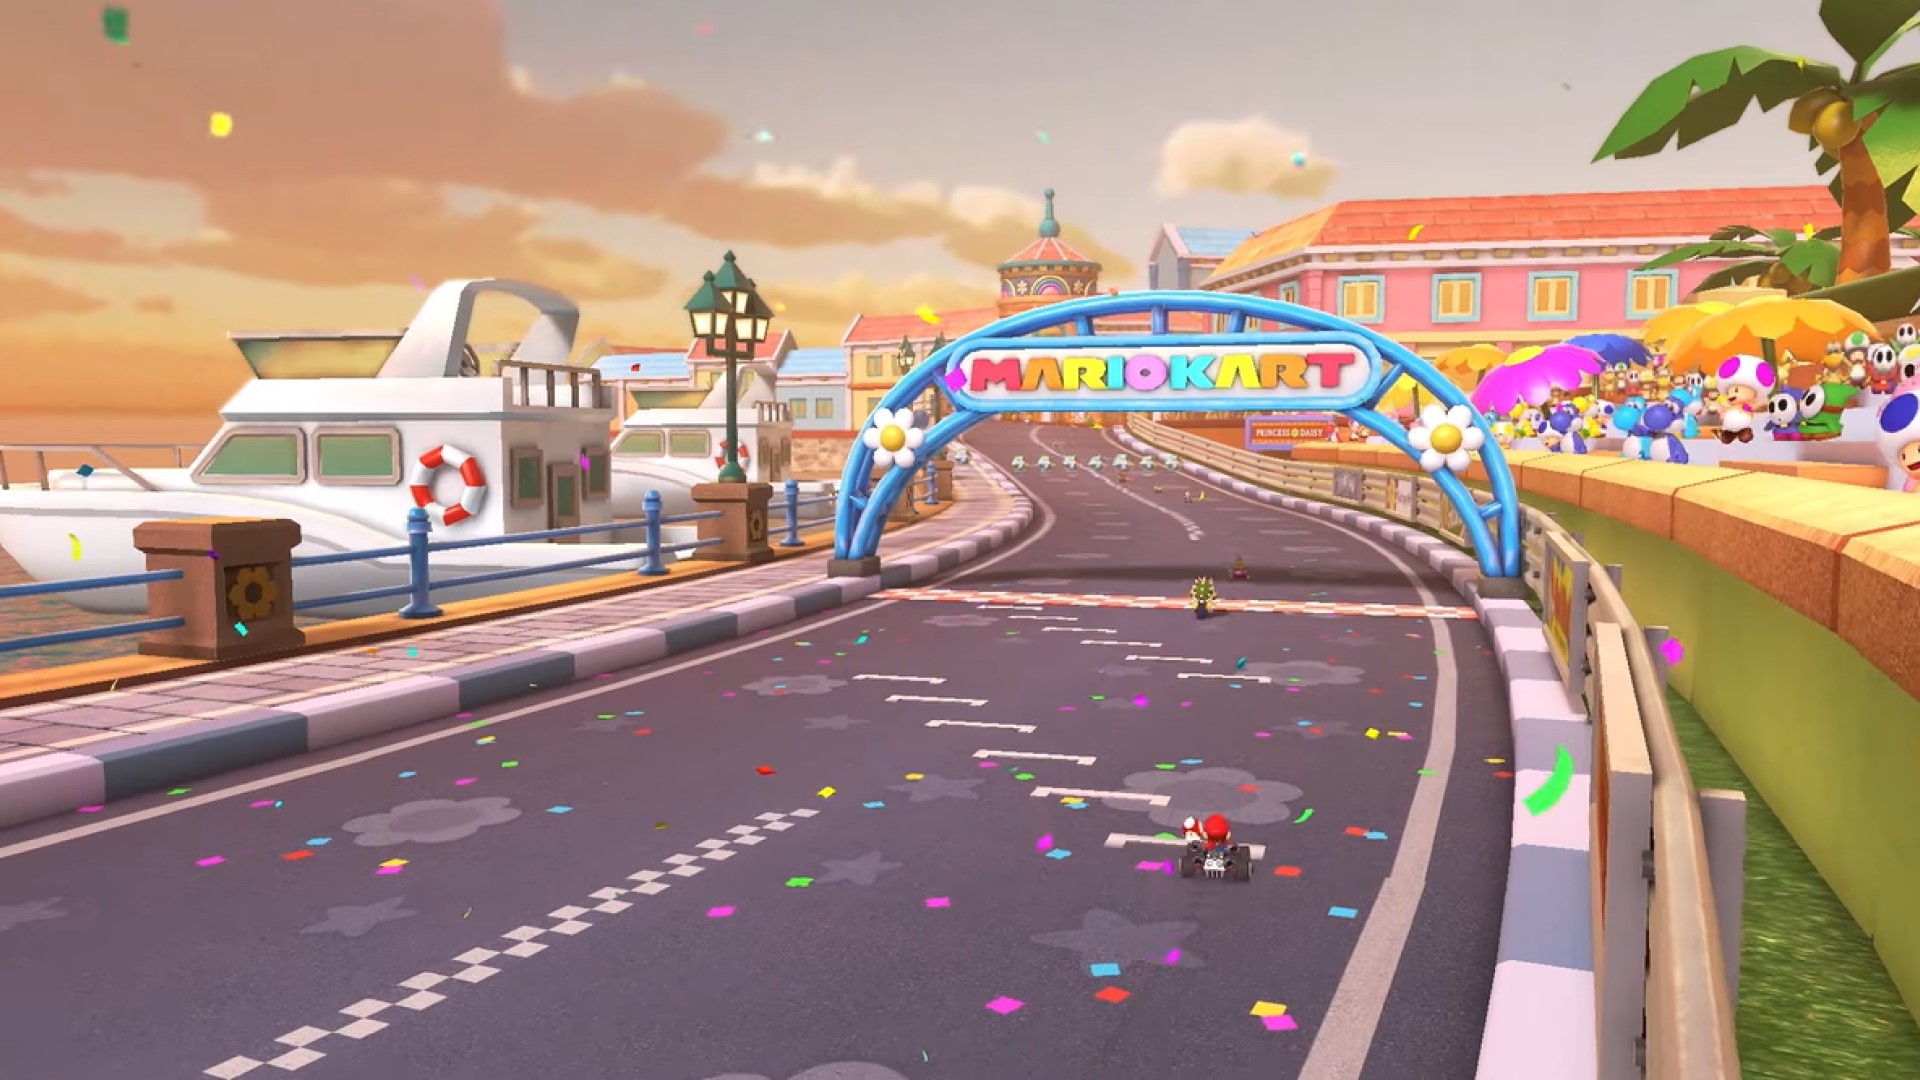 Mario Kart 8 Deluxe's Booster Course Wave 6 DLC has been revealed